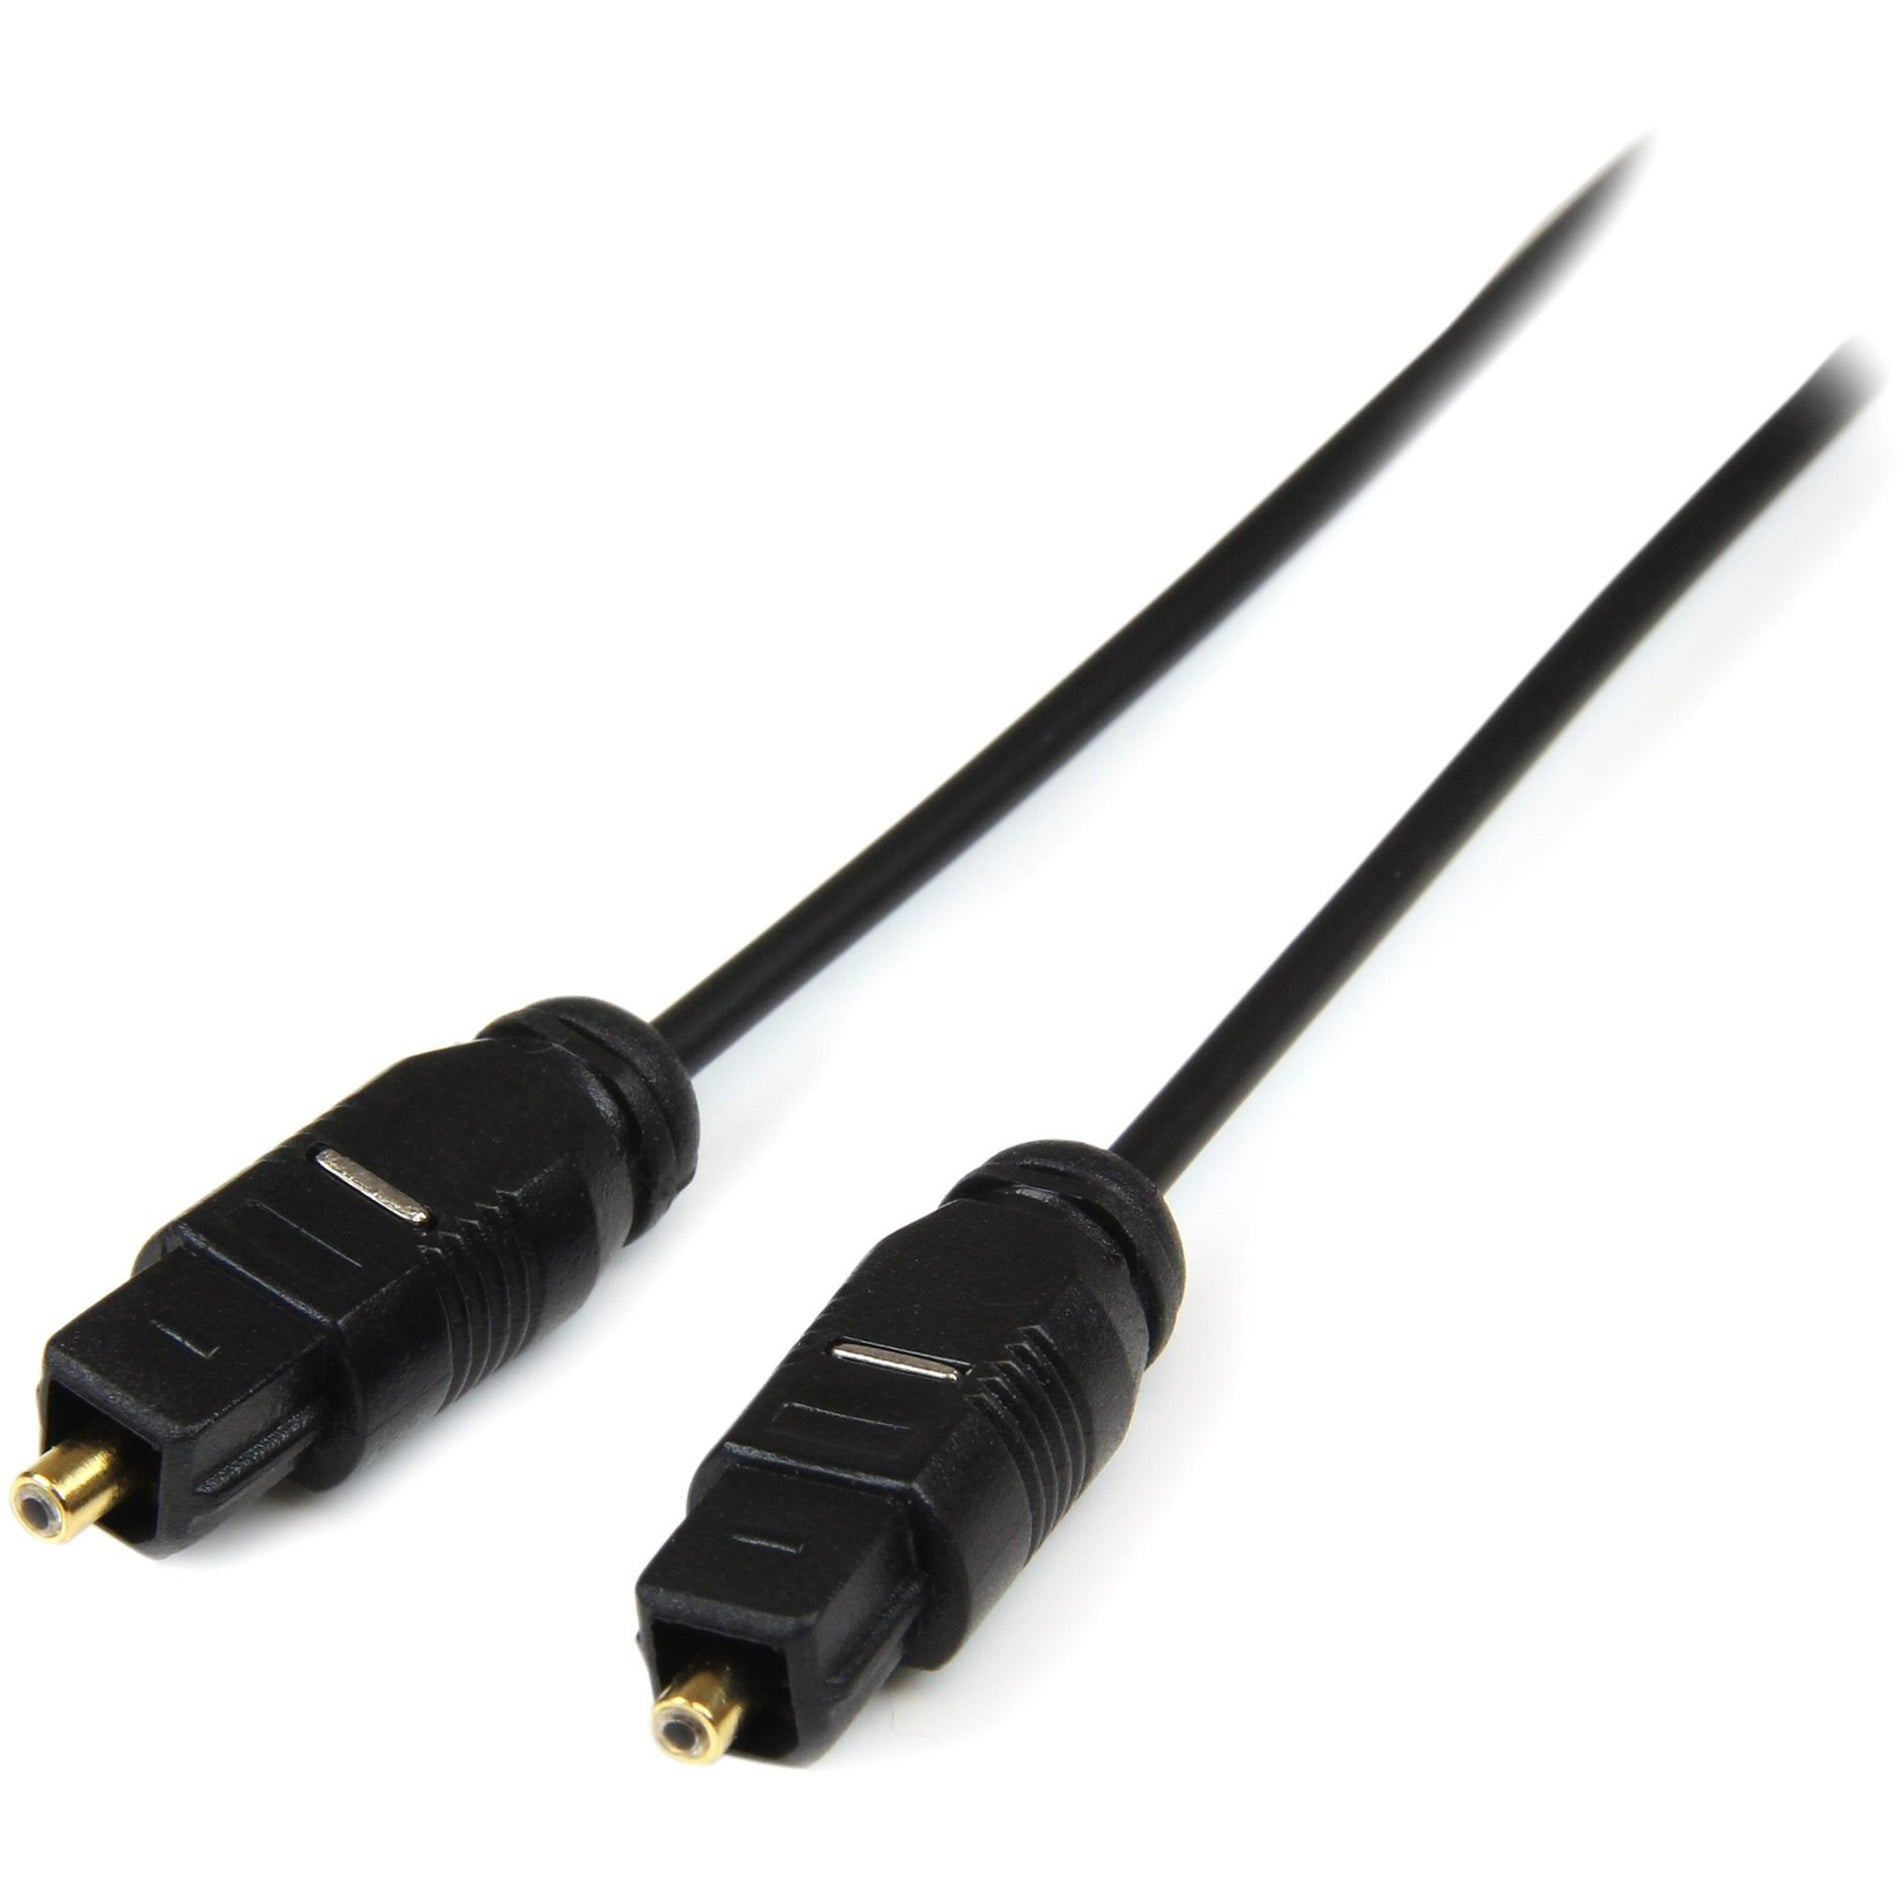 StarTech.com THINTOS3 3 ft Toslink SPDIF Optical Digital Audio Cable, Clear Sound, Durable Metal Shell, Lightweight